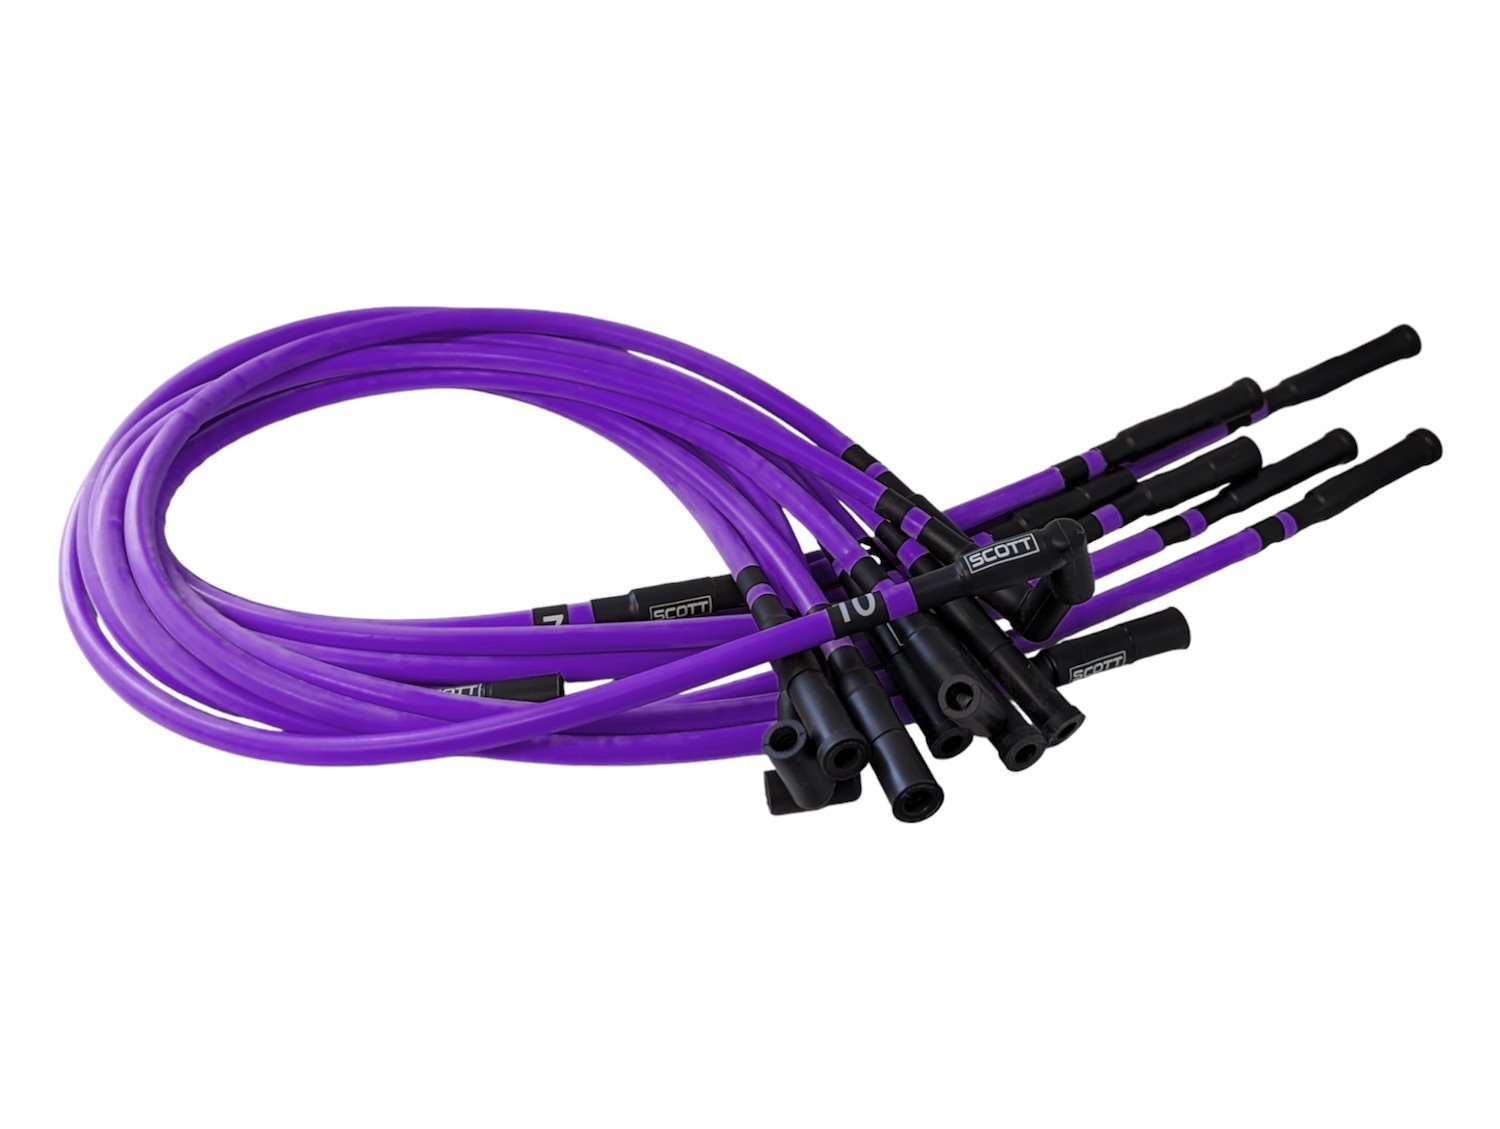 SPW-CH-690-III-6 High-Performance Silicone-Sleeved Spark Plug Wire Set for Dodge Viper (Gen-3) [Purple]